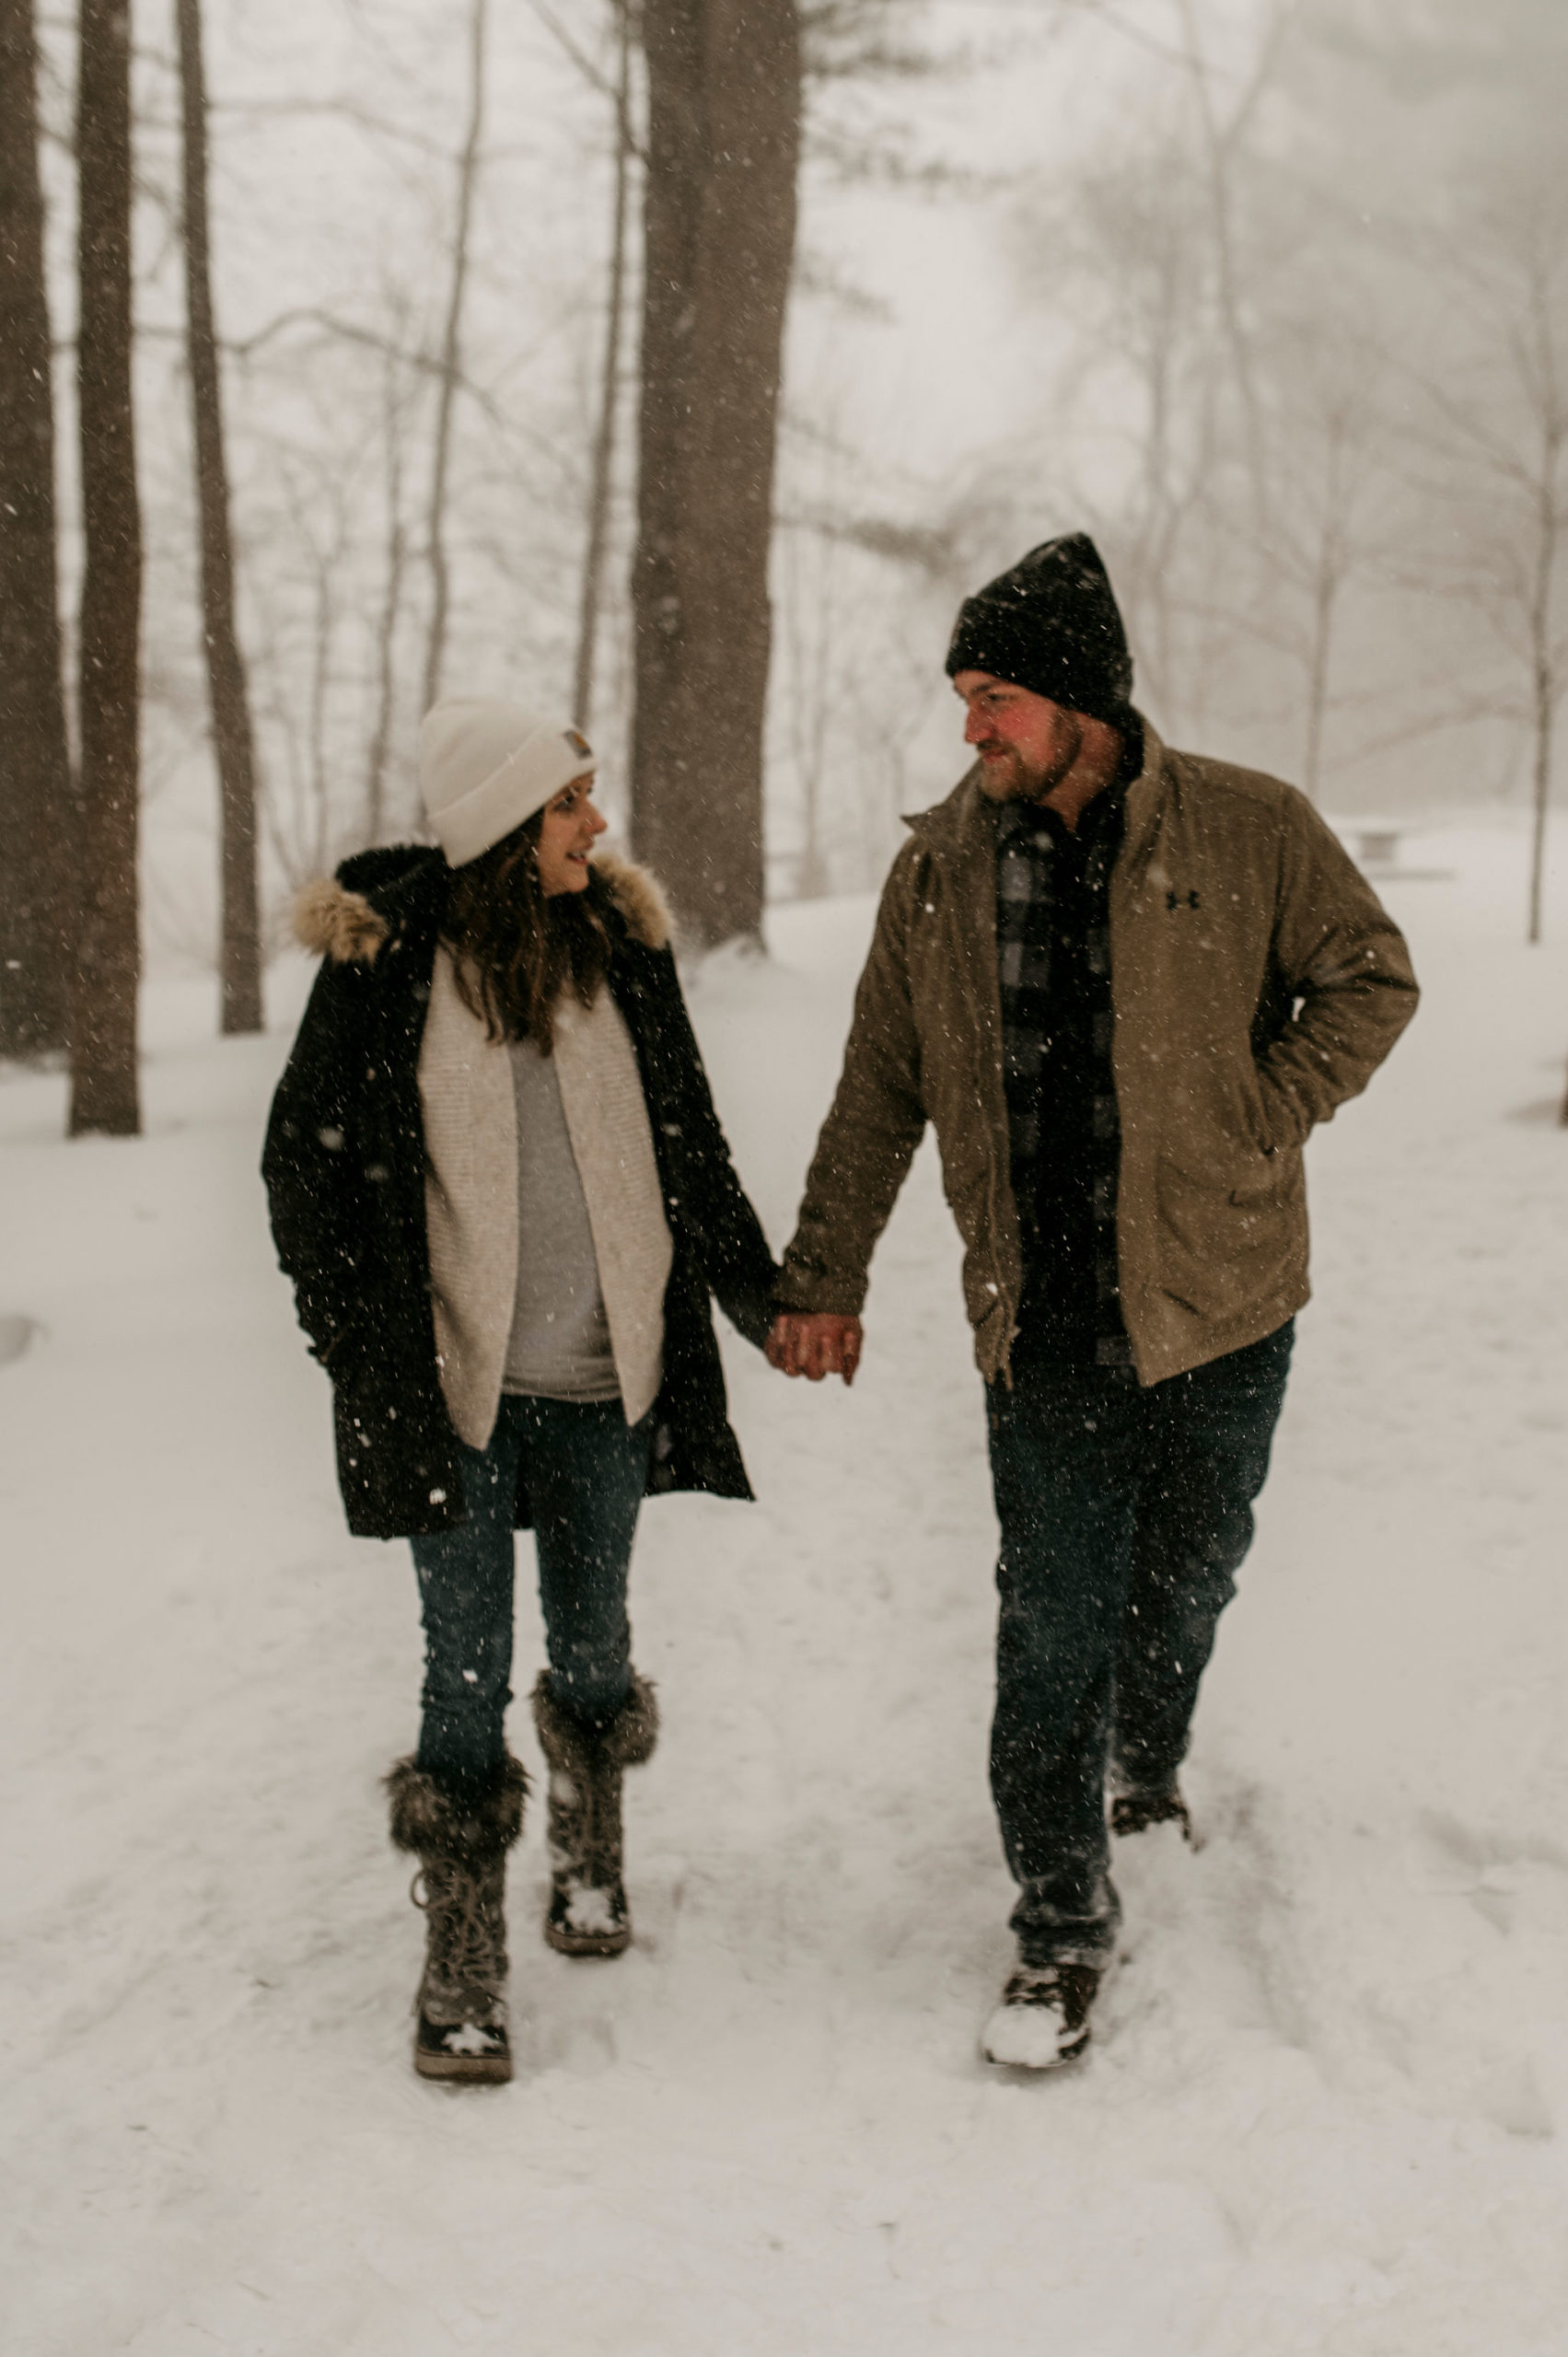 couple walking and holding hands in a snowy forest | Tips For Your New York Winter Engagement or Elopement